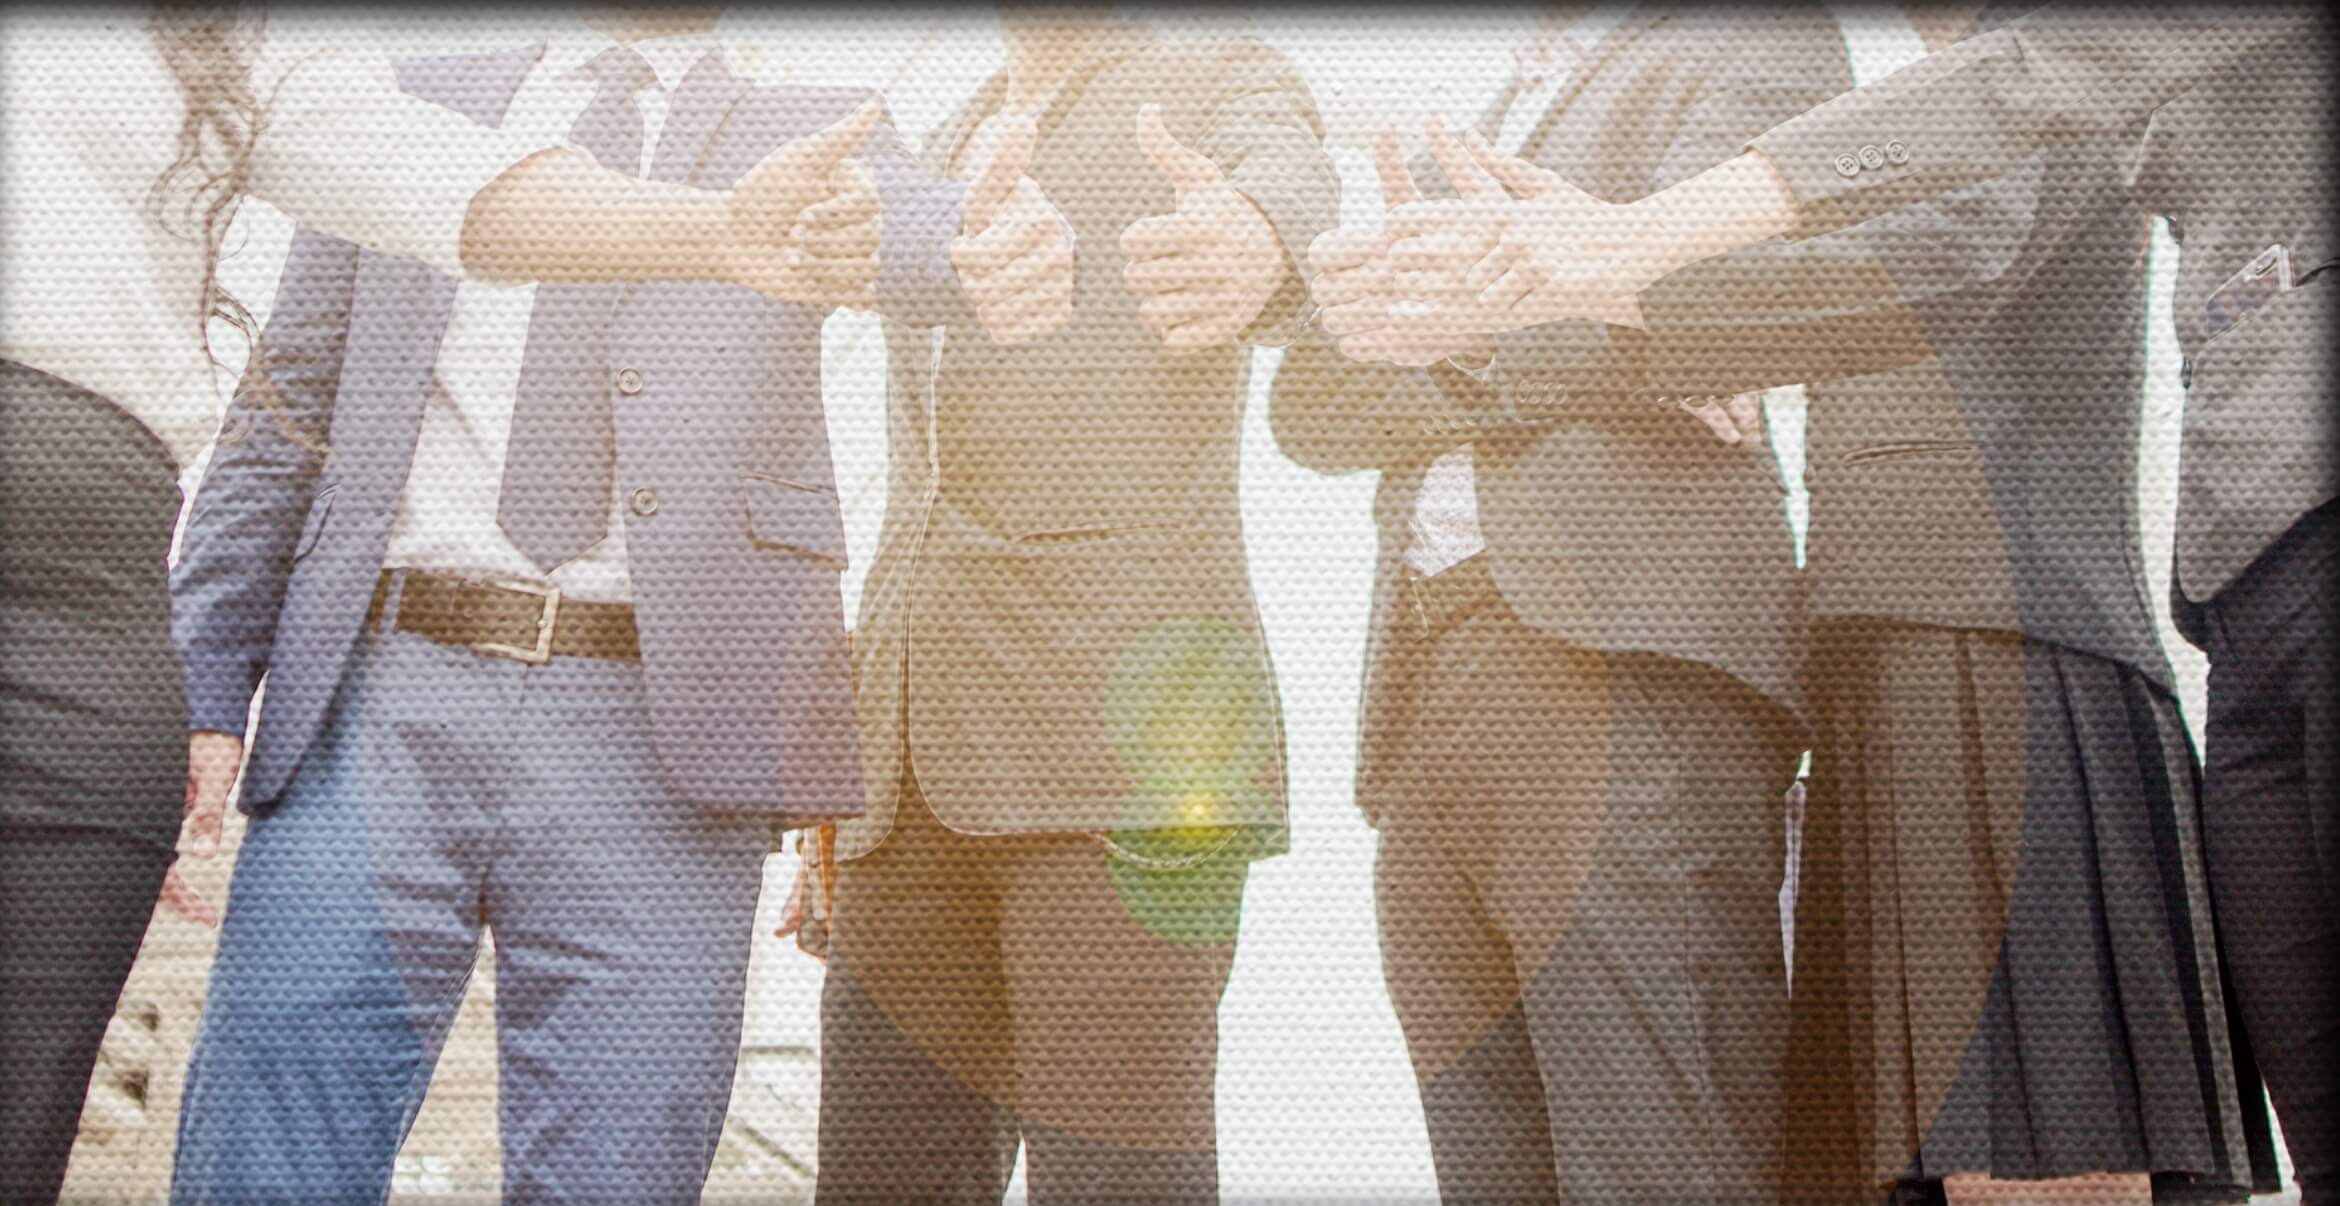 Group of business people in a half circle giving thumbs up